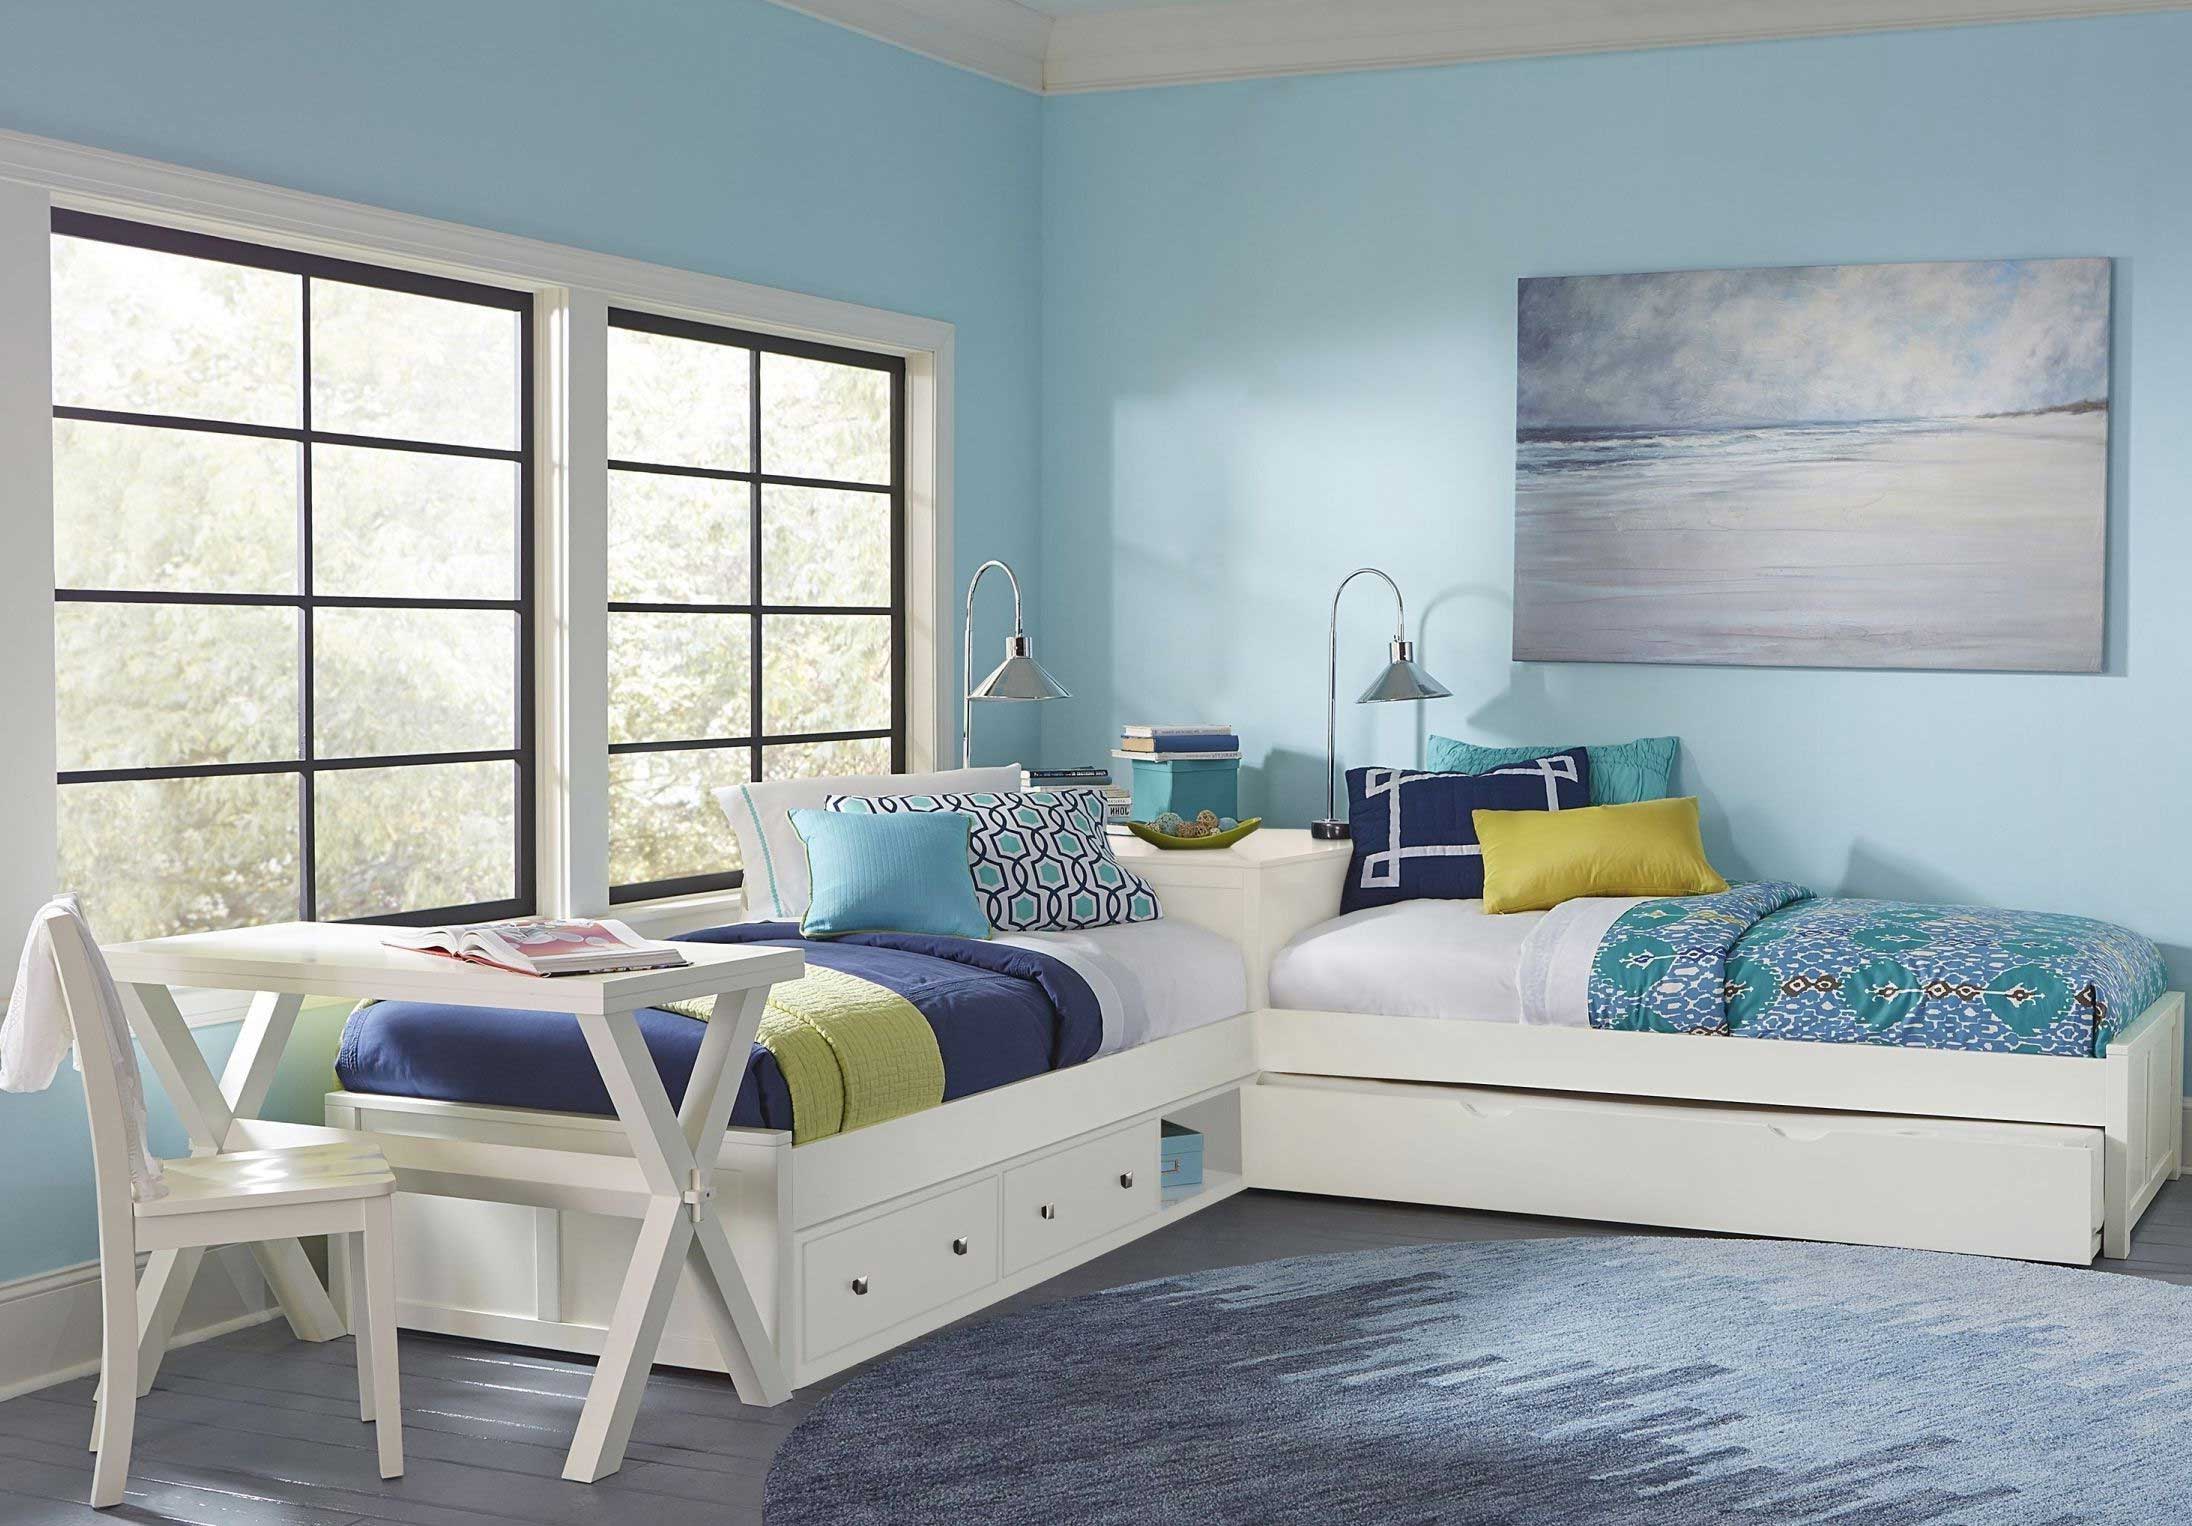 Twin XL Bed Frame With Drawers Design To Save Space And Maximizing Room | Roy Home Design